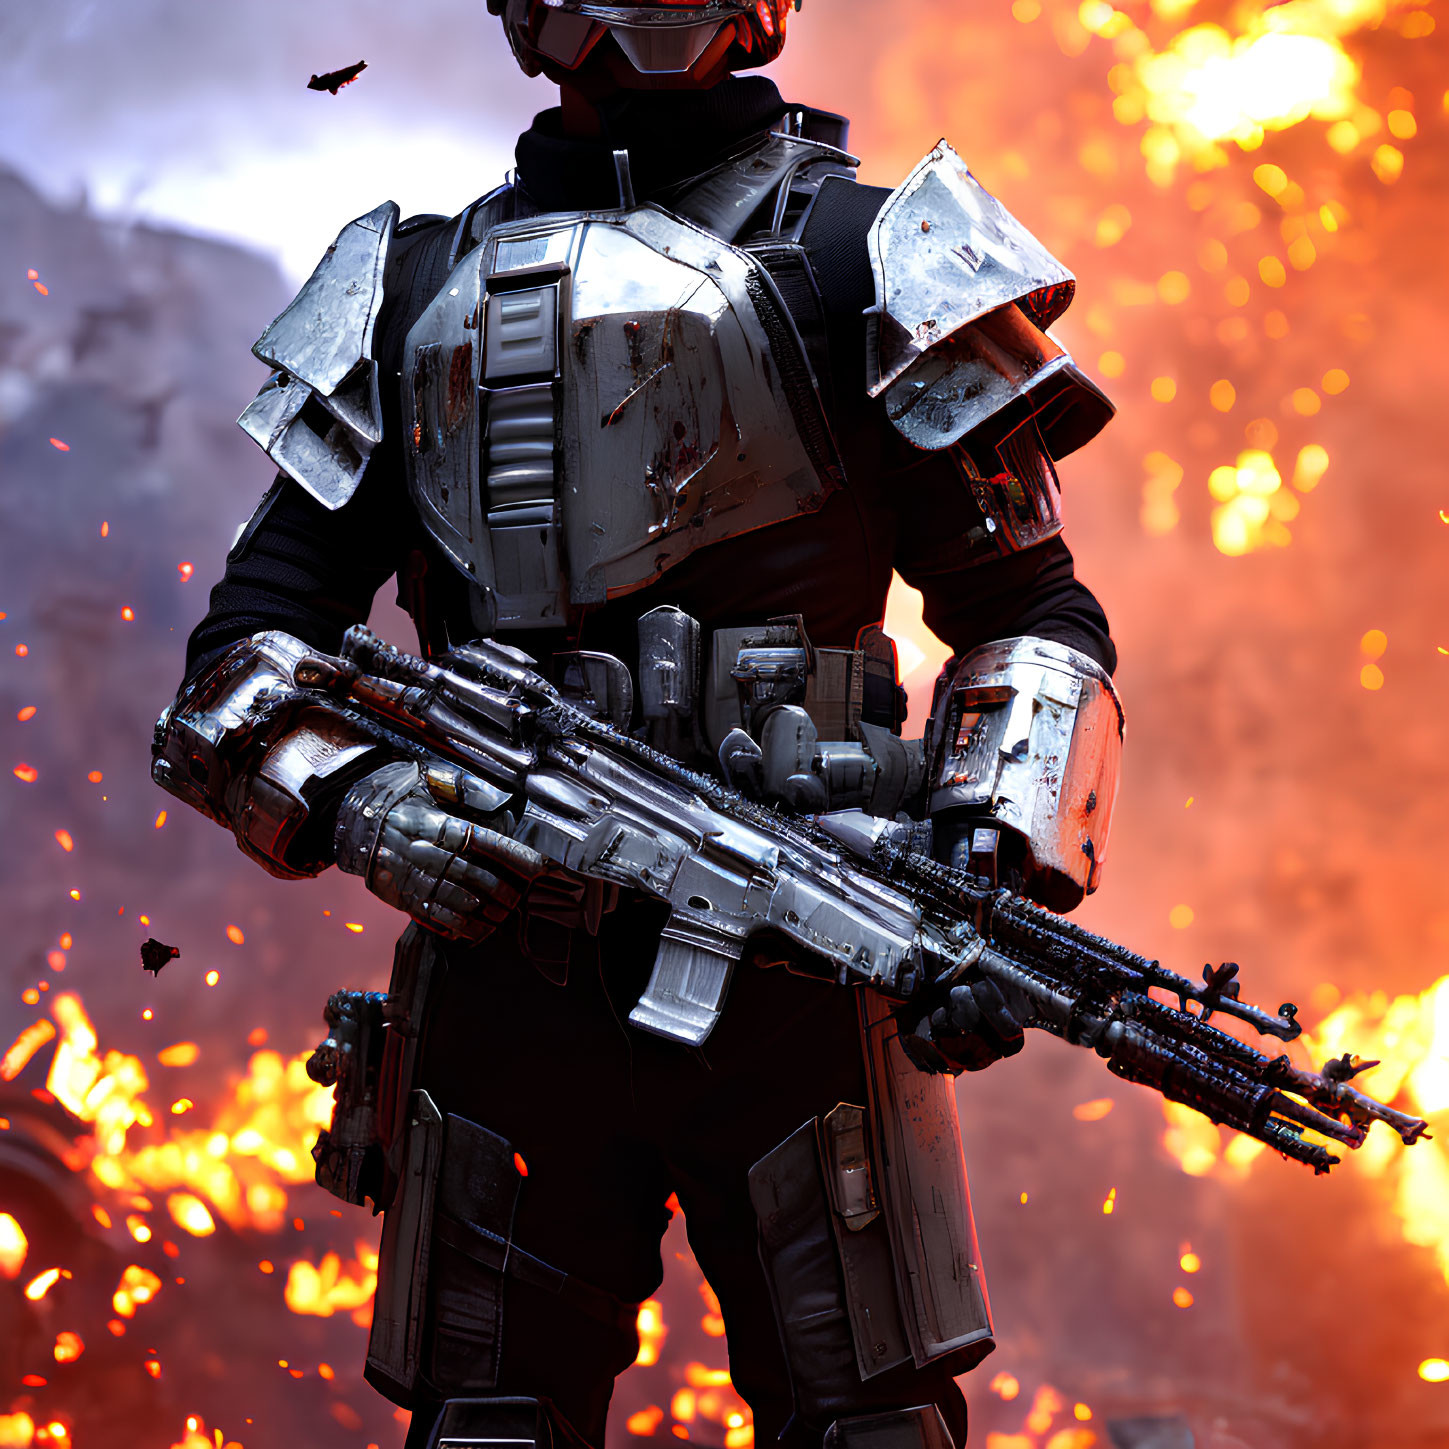 Futuristic soldier in heavy armor with advanced rifle amidst fiery explosions